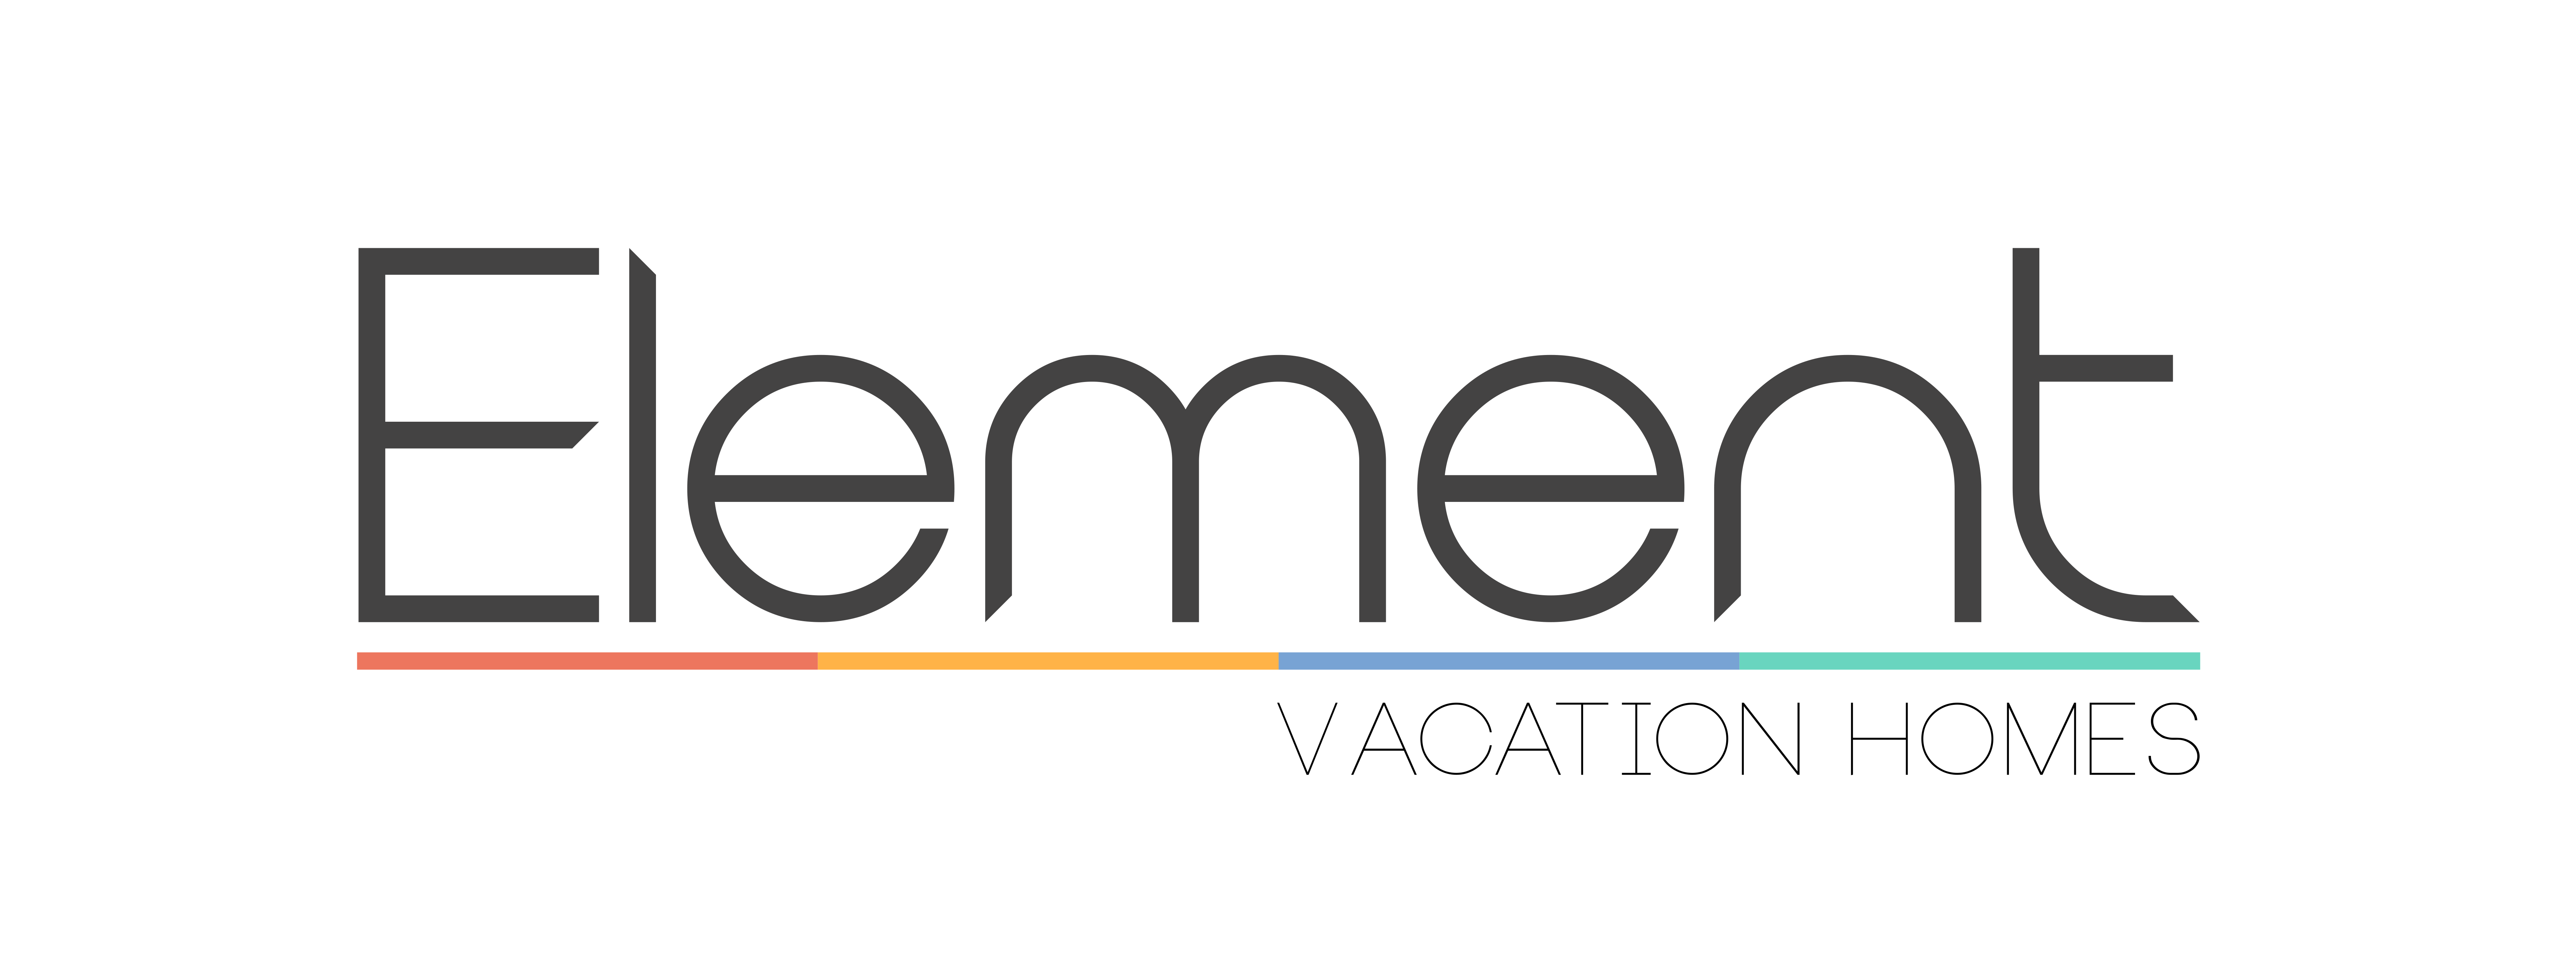 Element Vacation Homes - Central Florida Vacation Rental Management Company!